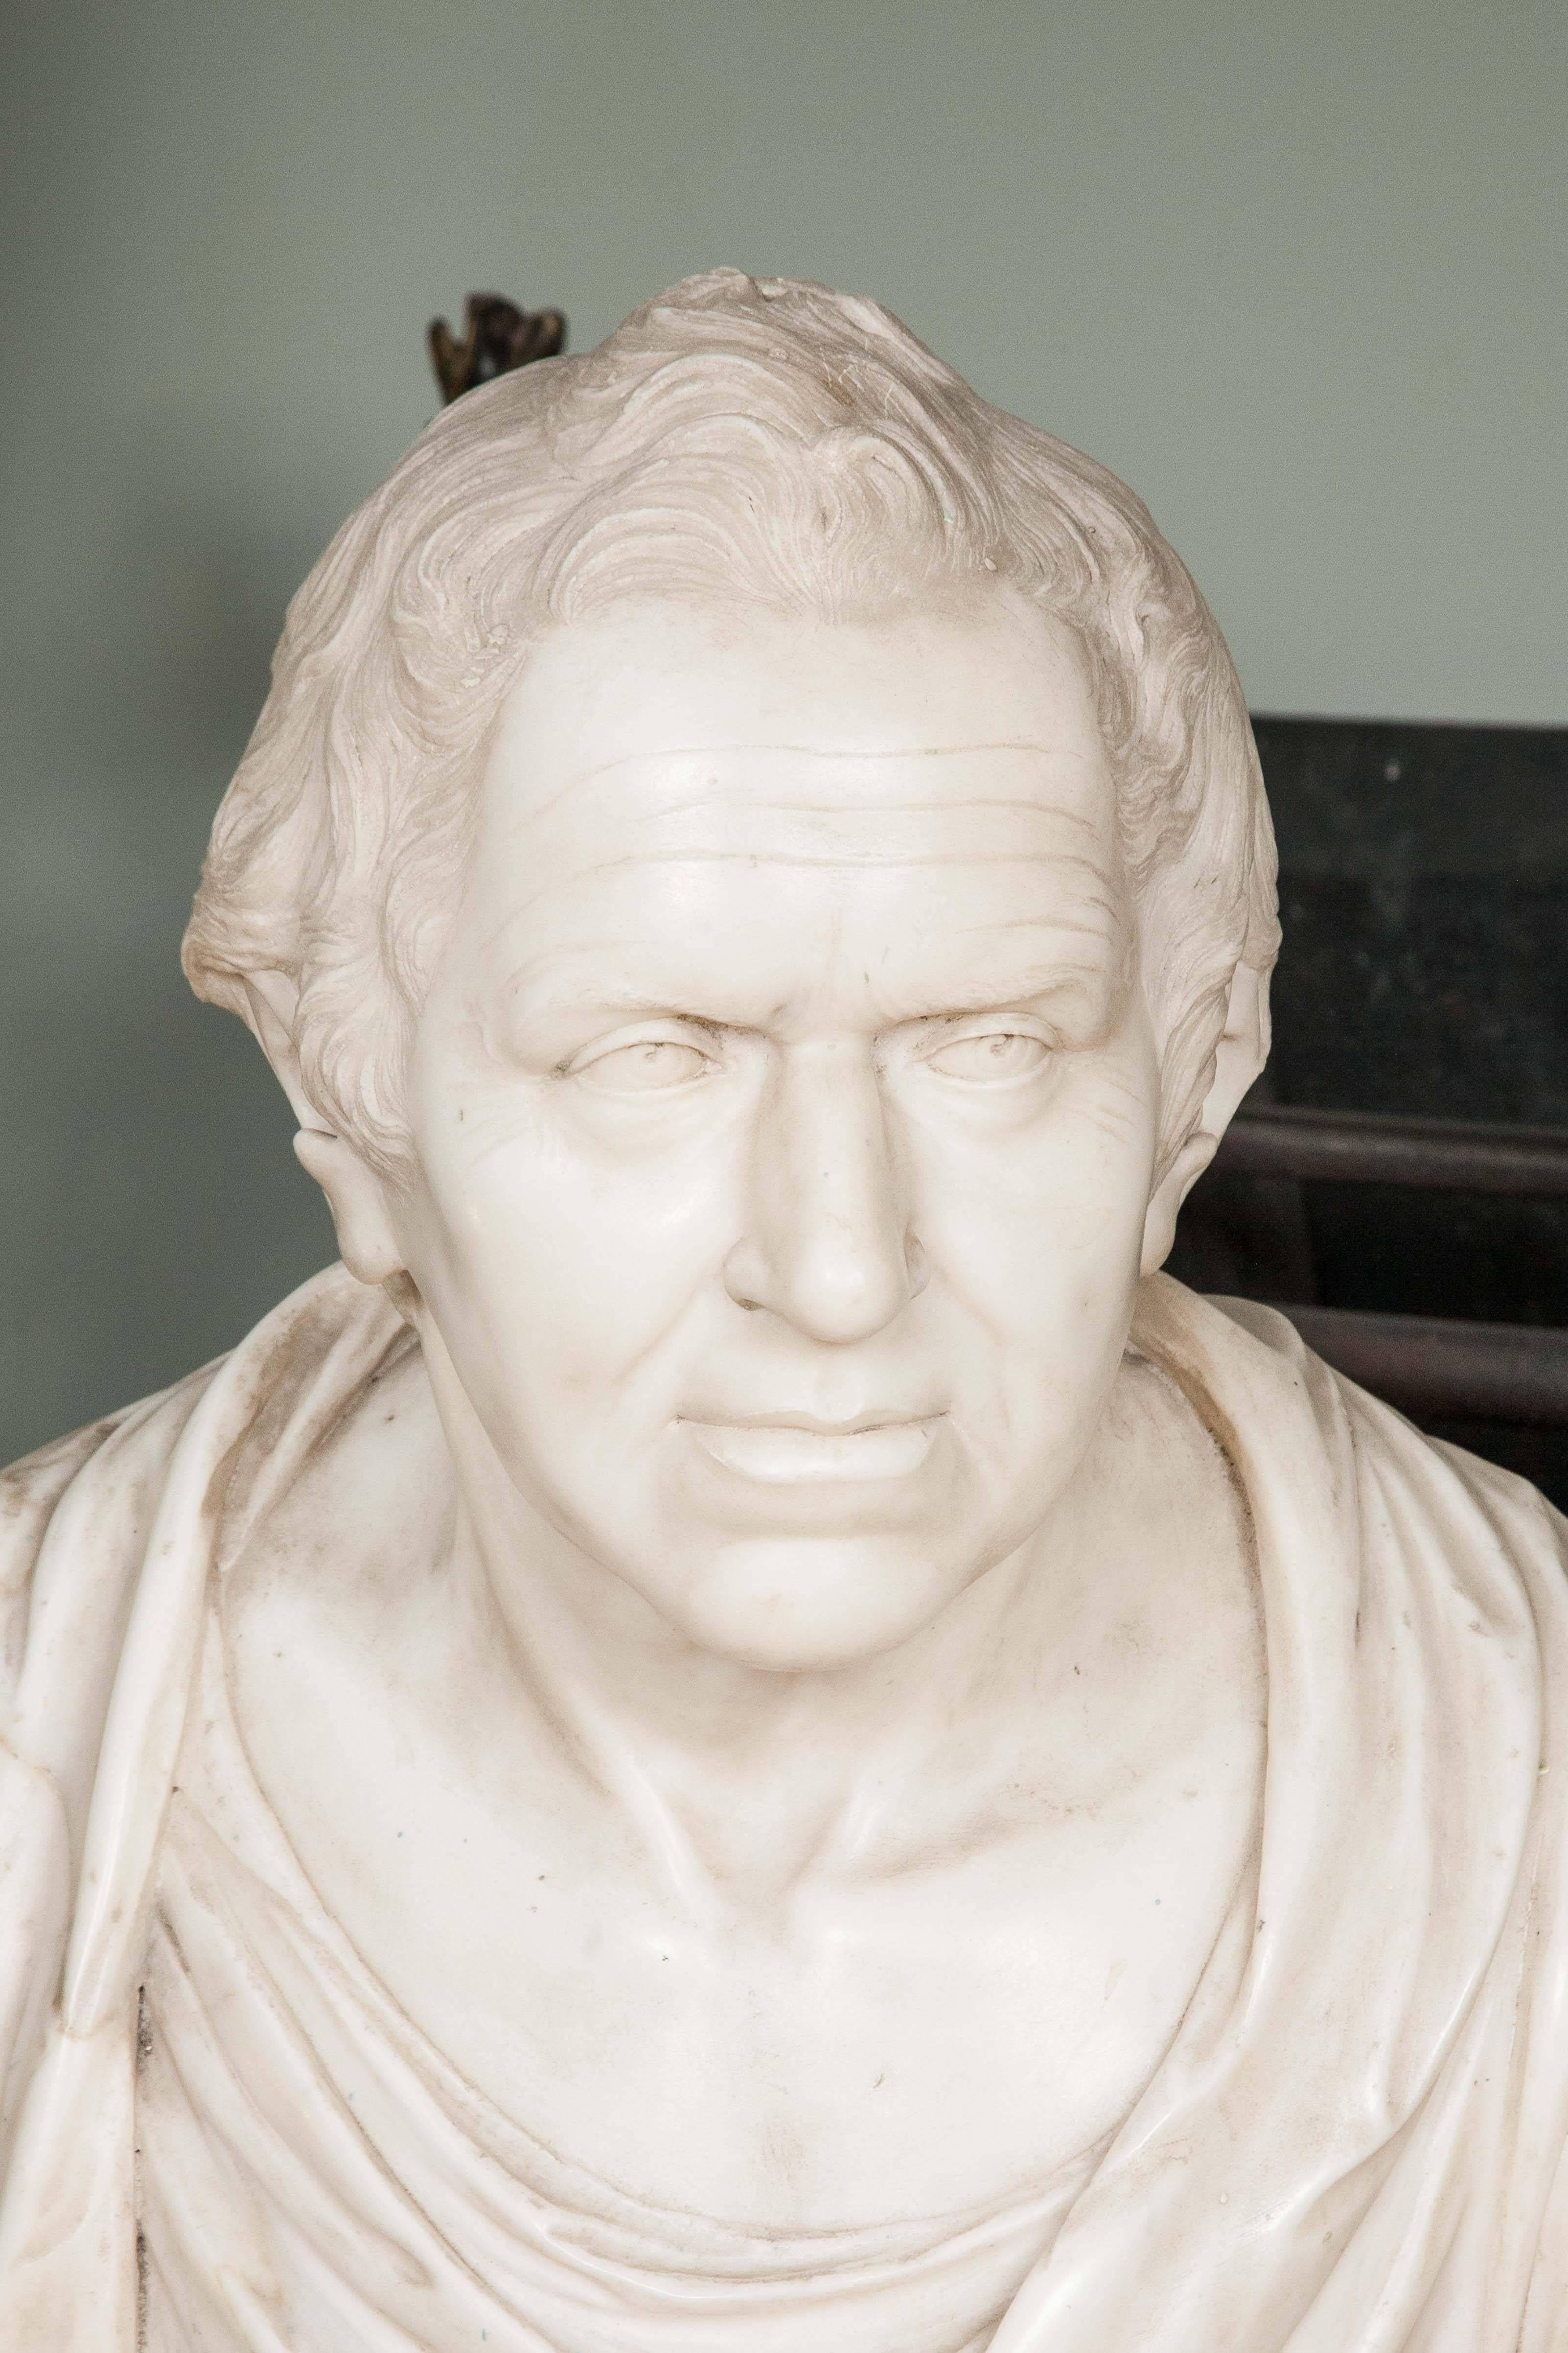 Carved in Italian statuary marble, possibly by Peter Turnerelli (1774–1839), a successful Irish-born sculptor of Italian descent working in Britain in the late 18th / early 19th century. Tunerelli taught modelling to the daughters of George III